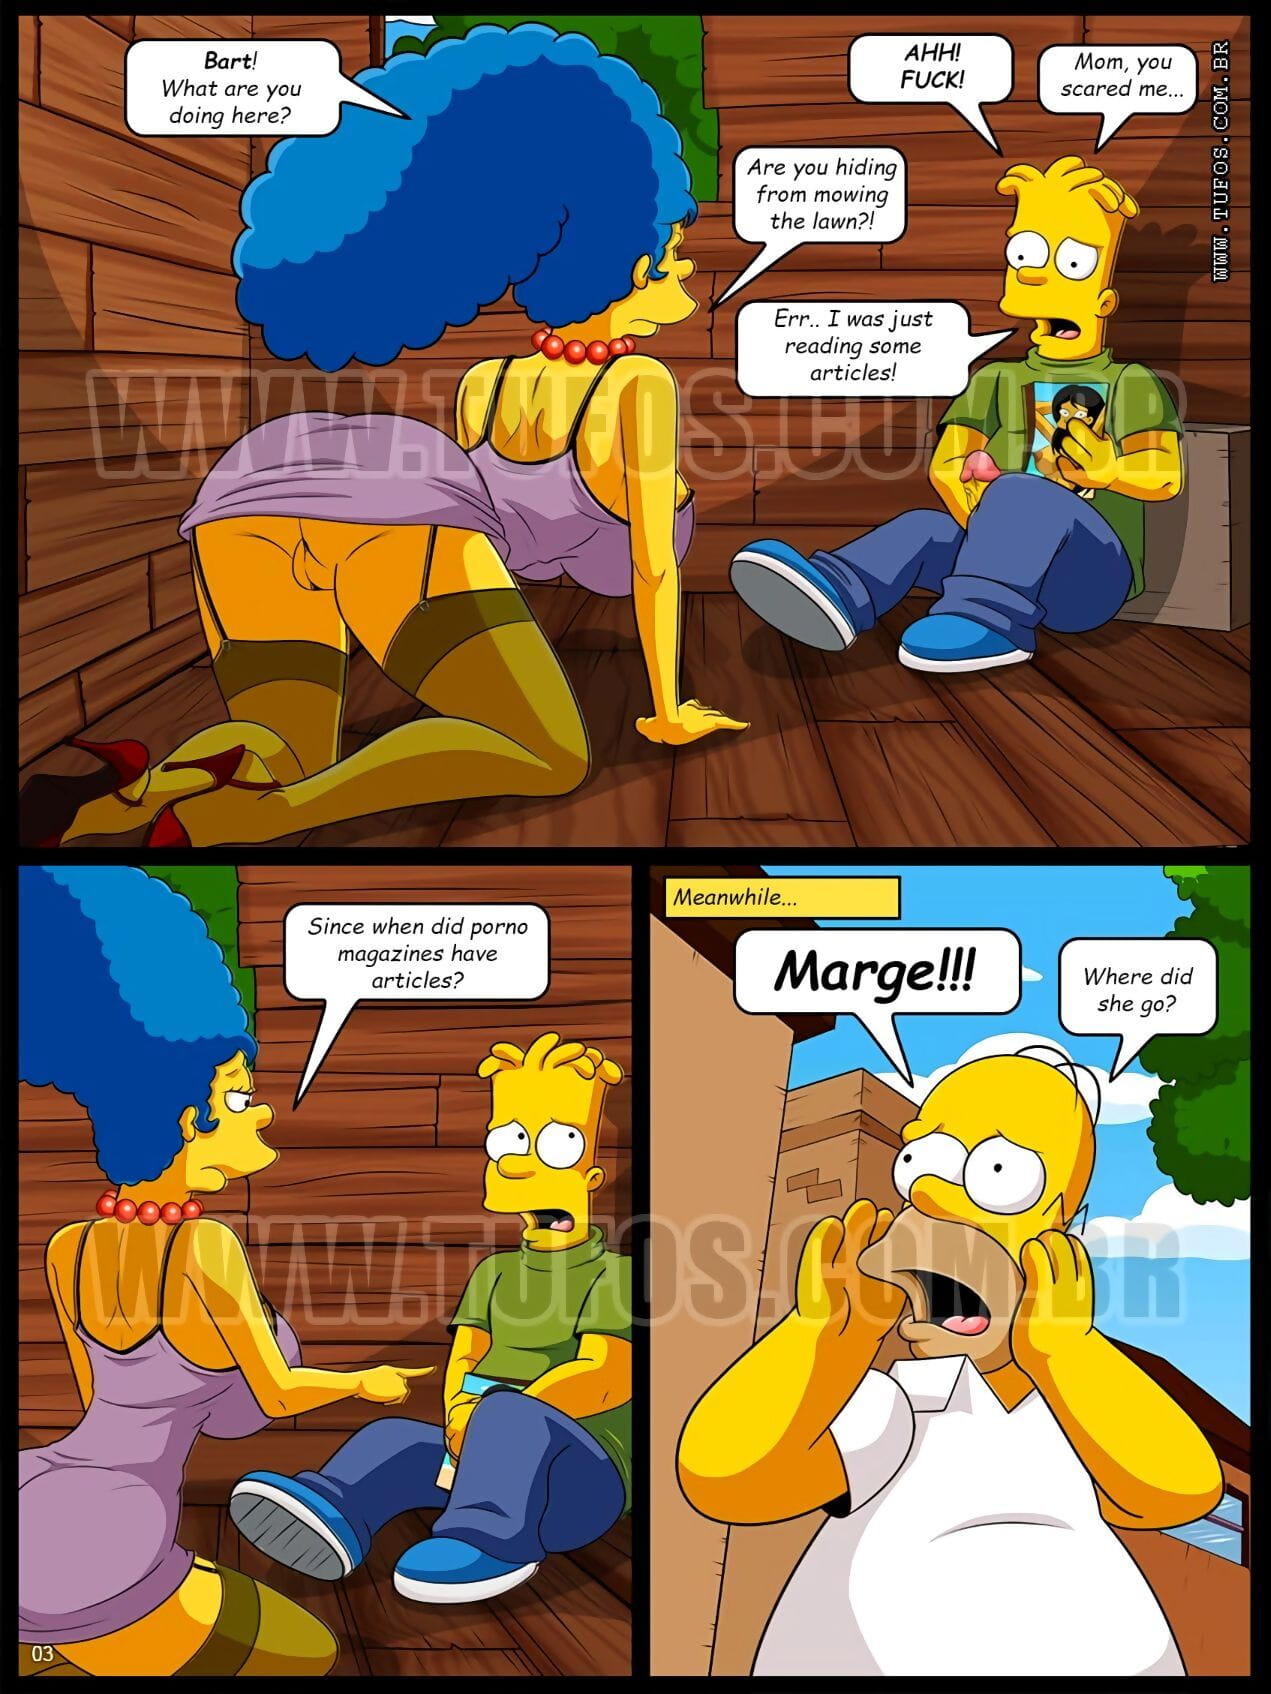 Croque w The simpsons 12 page 1